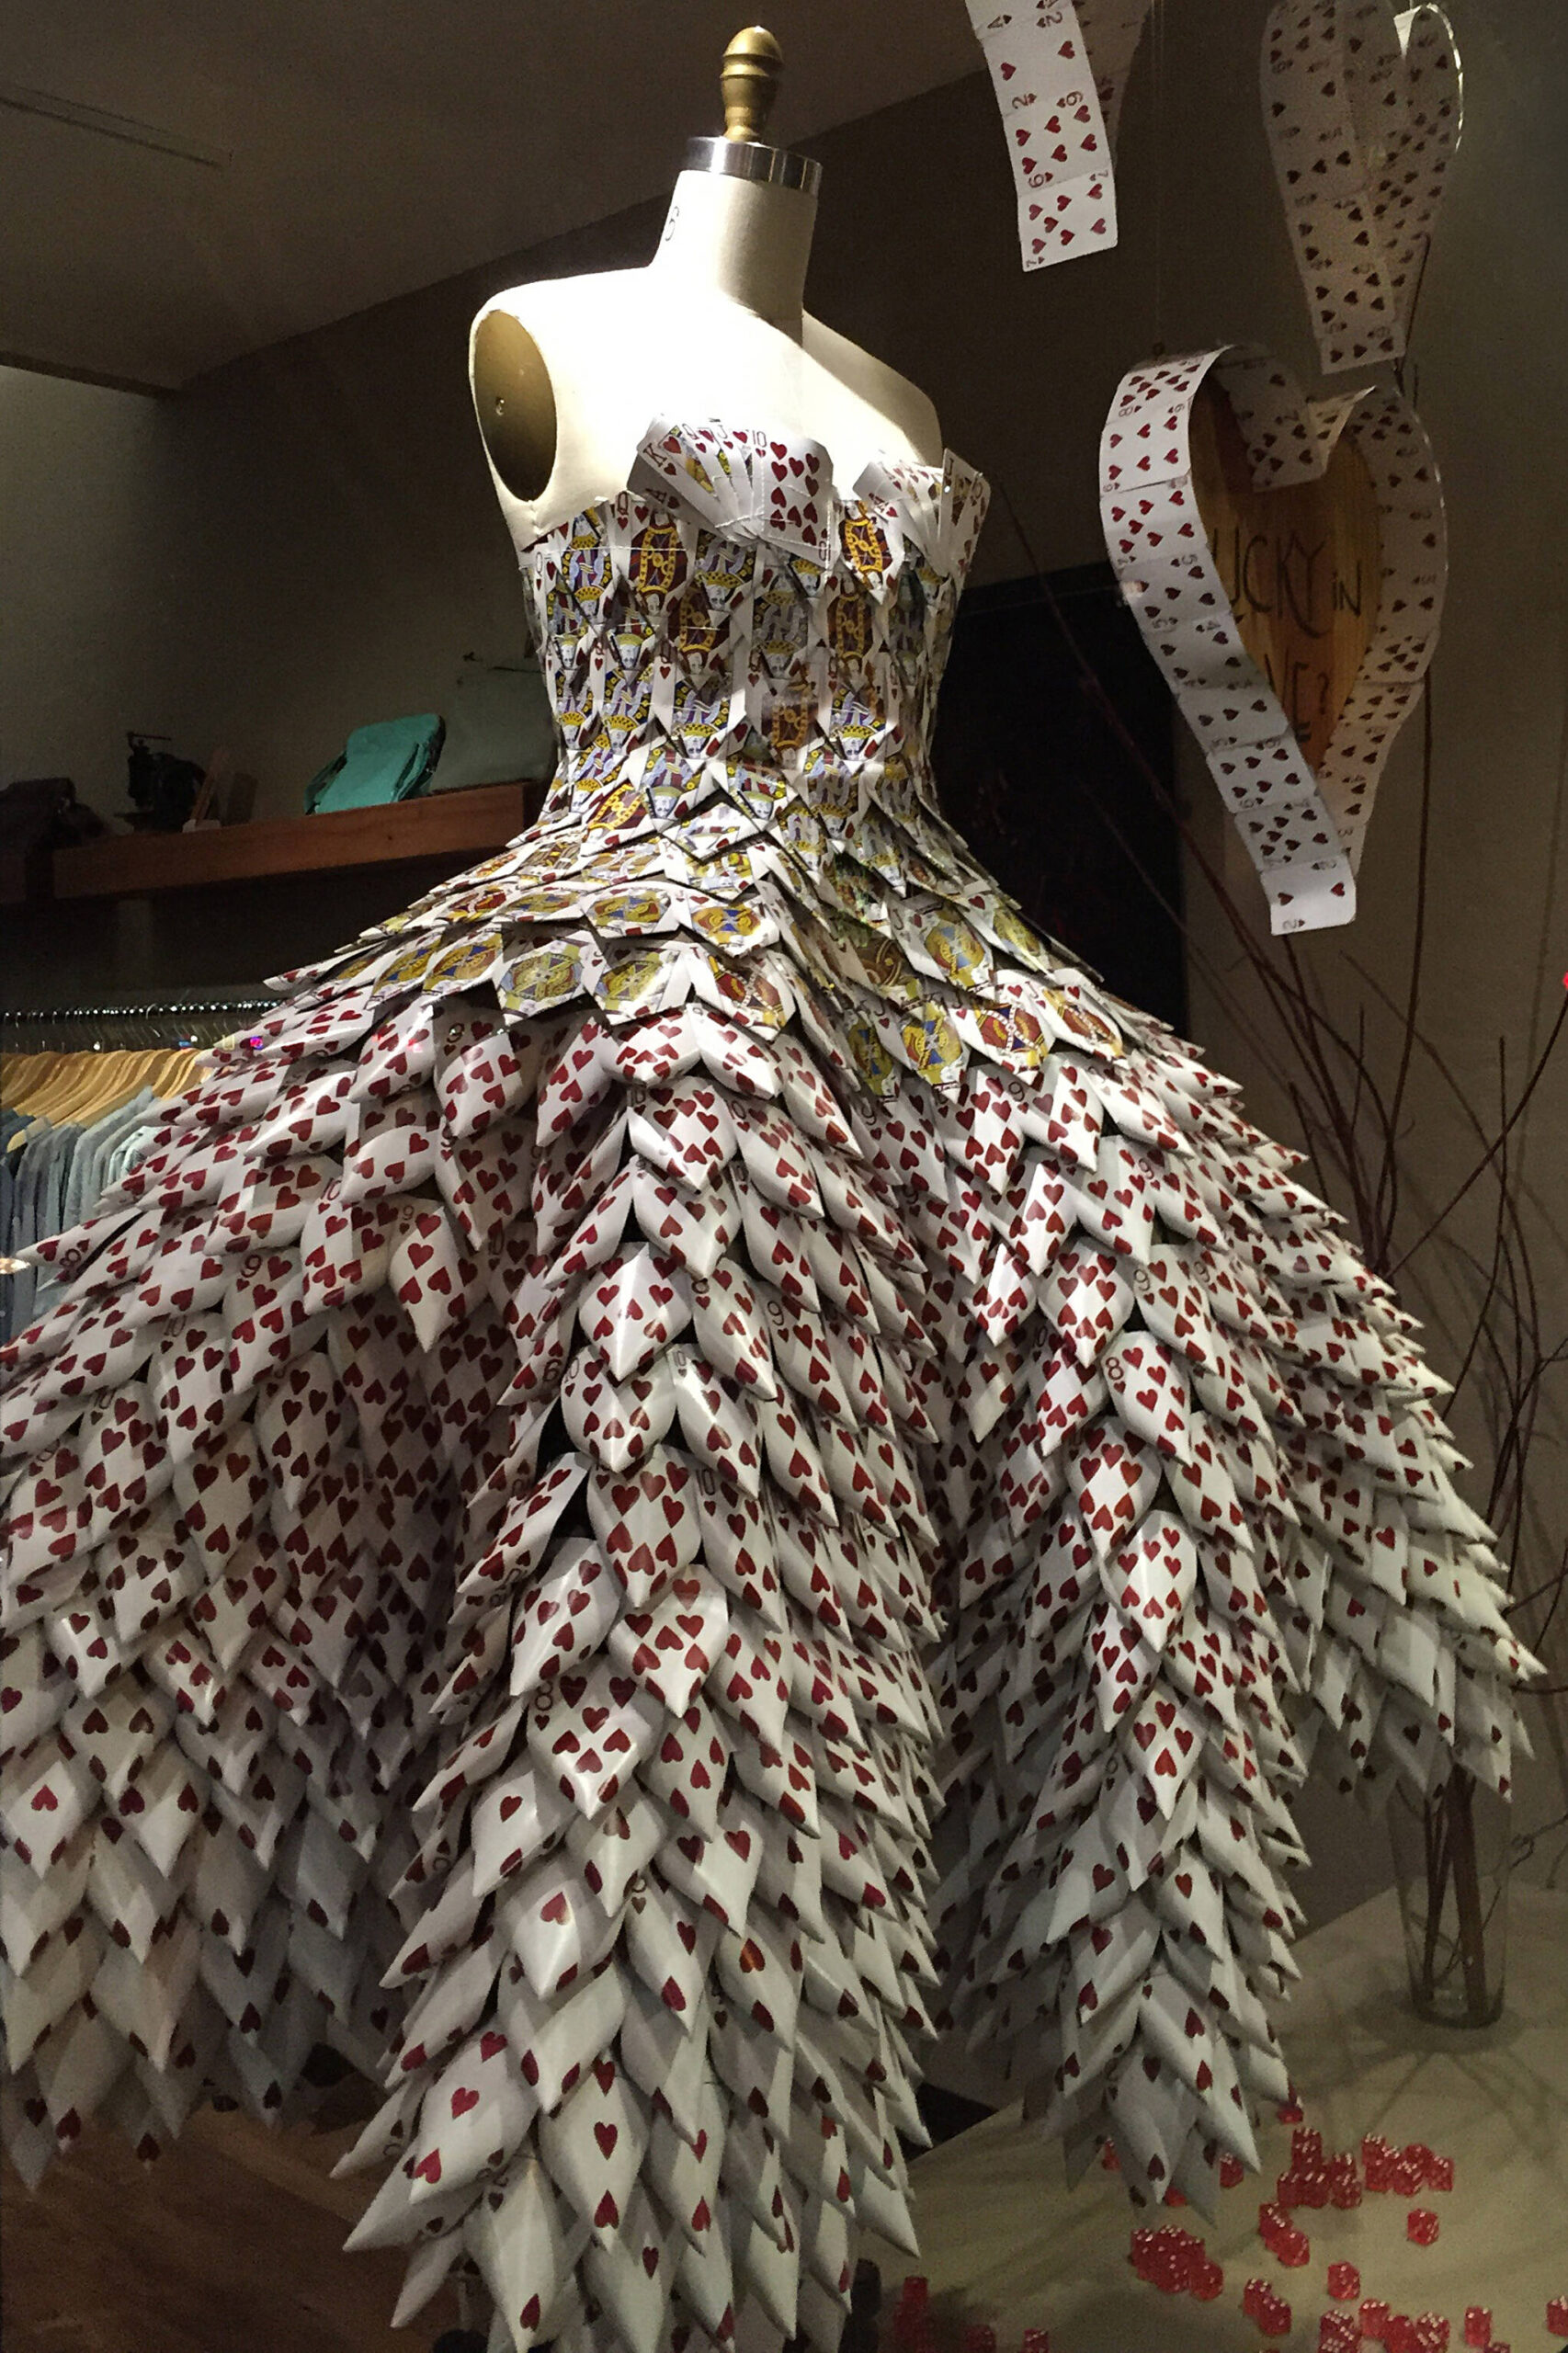 Art of Recycling: A Dress From Binder Clips